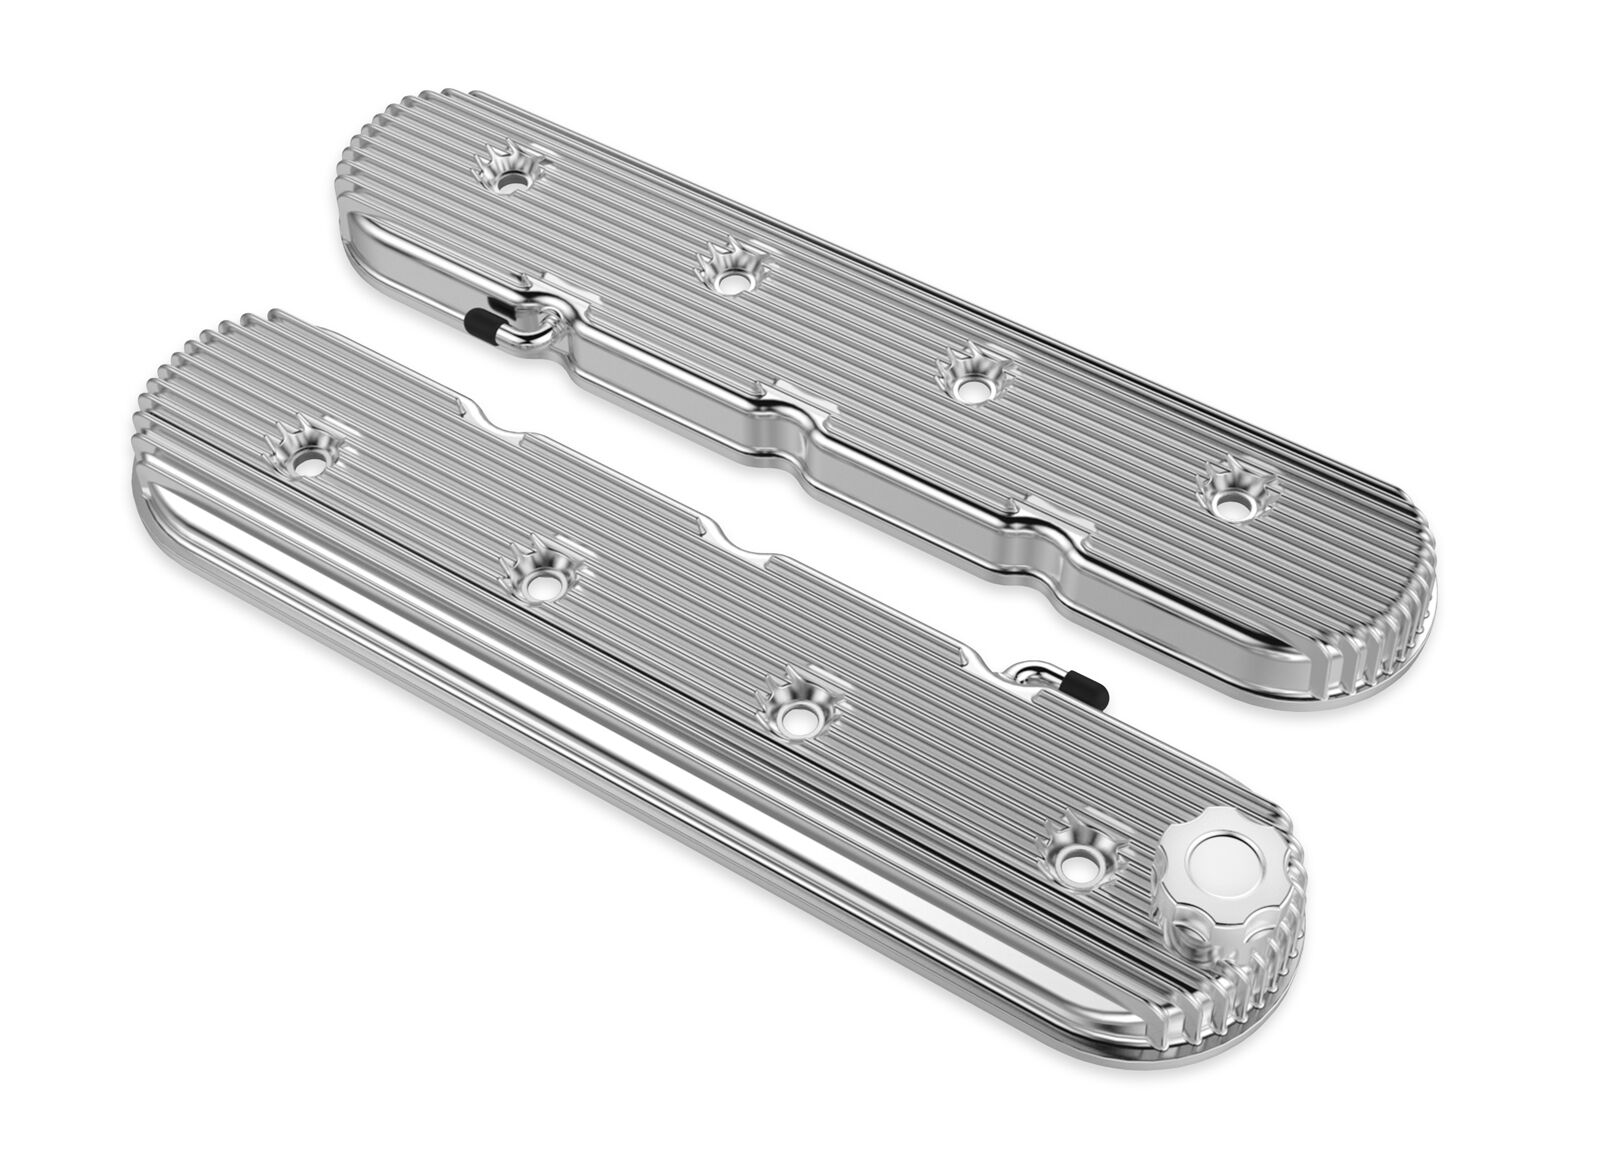 GM LS V8 Satin Finned Aluminum 2-Piece Valve Covers with Coil Mounts and Covers